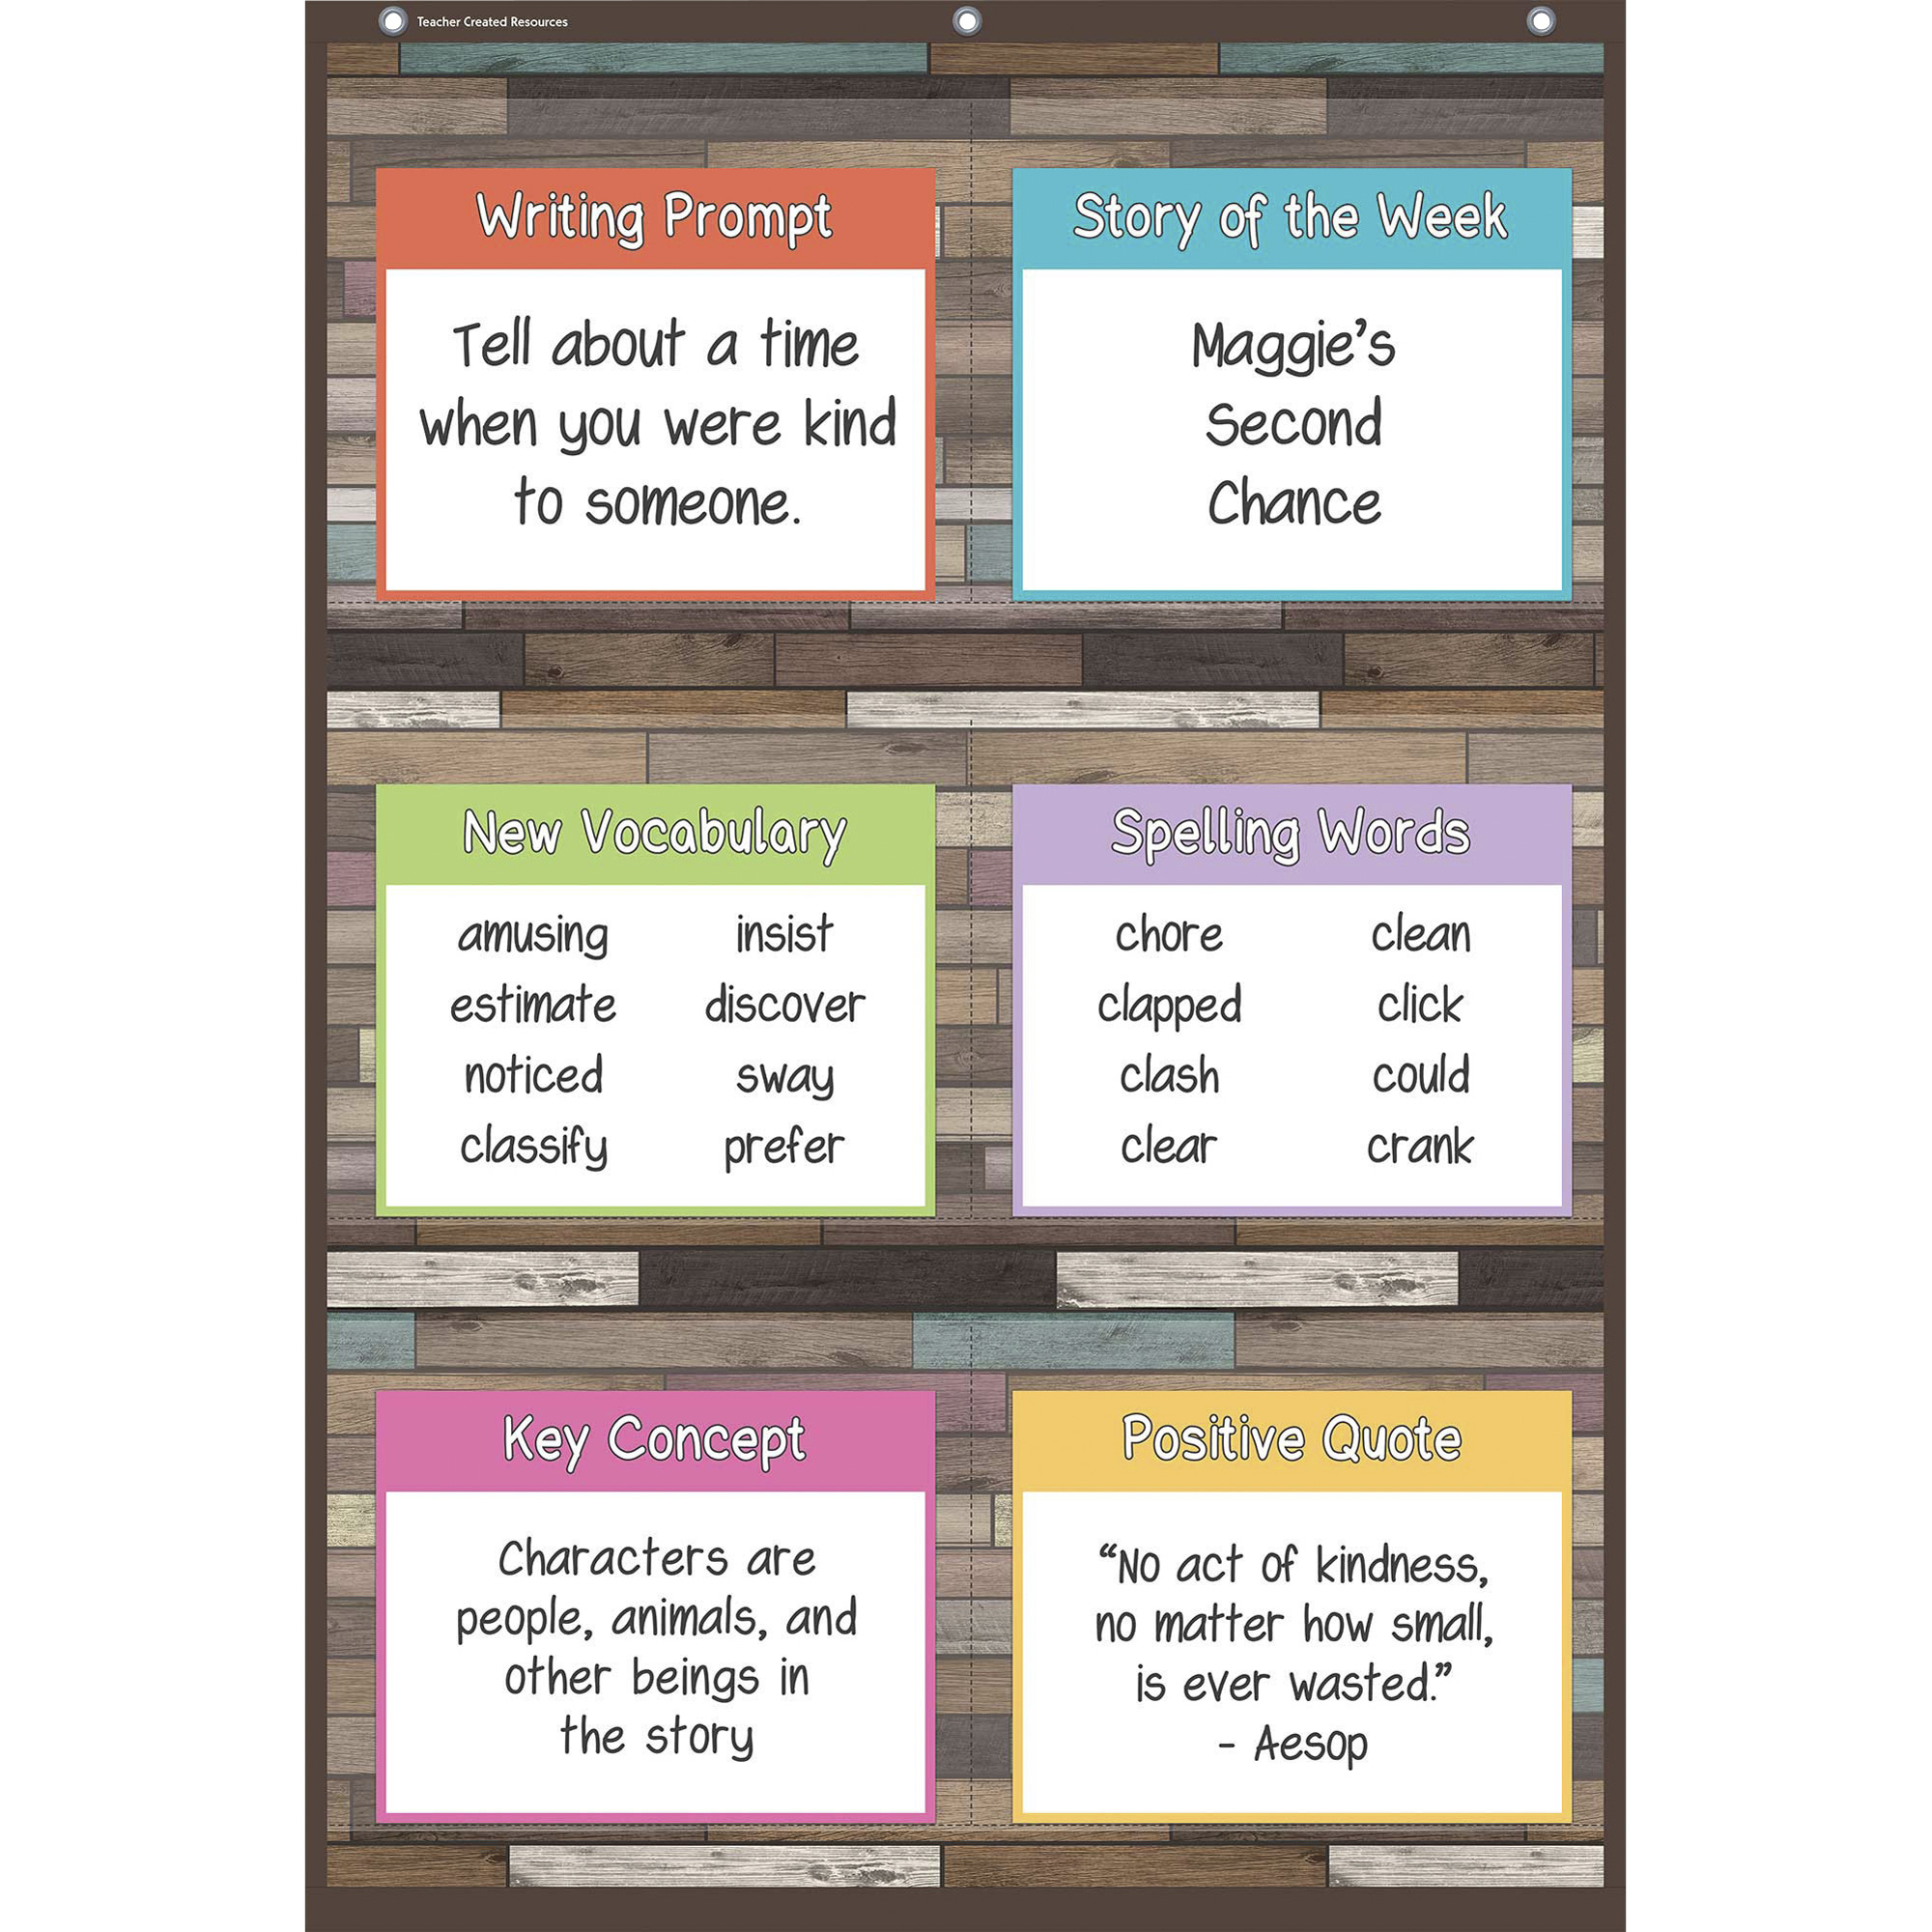 Pacon Heavy Duty Anchor Chart Paper, 25 Sheets - Grid Ruled - 27 x 34 -  White Paper - 4 / Carton 